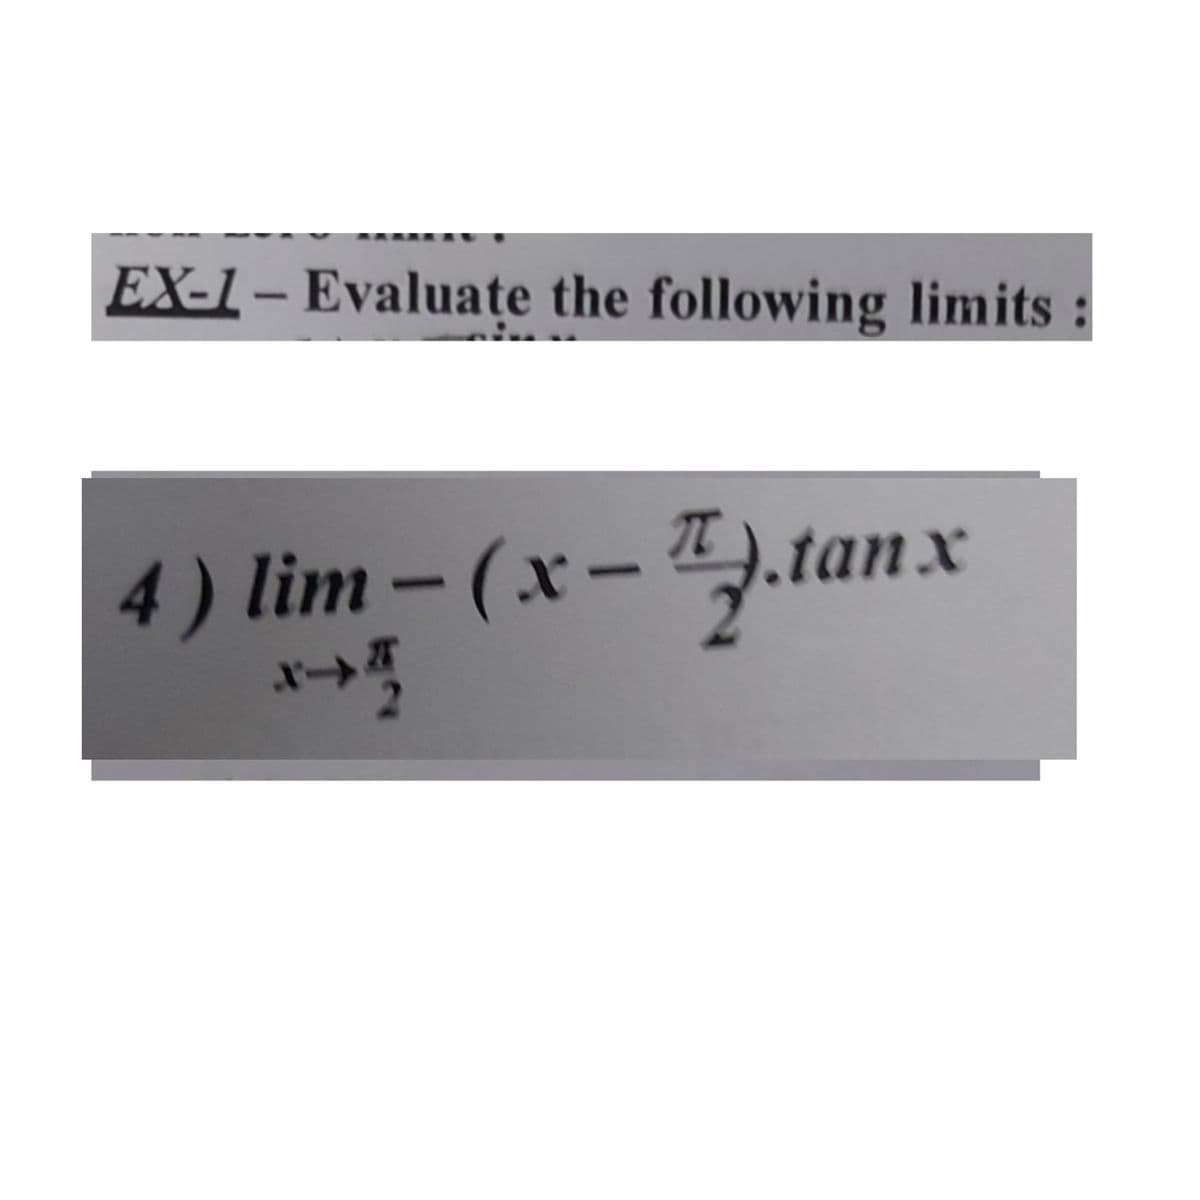 EX-1- Evaluate the following limits
4 ) lim – (x – ).tanx
